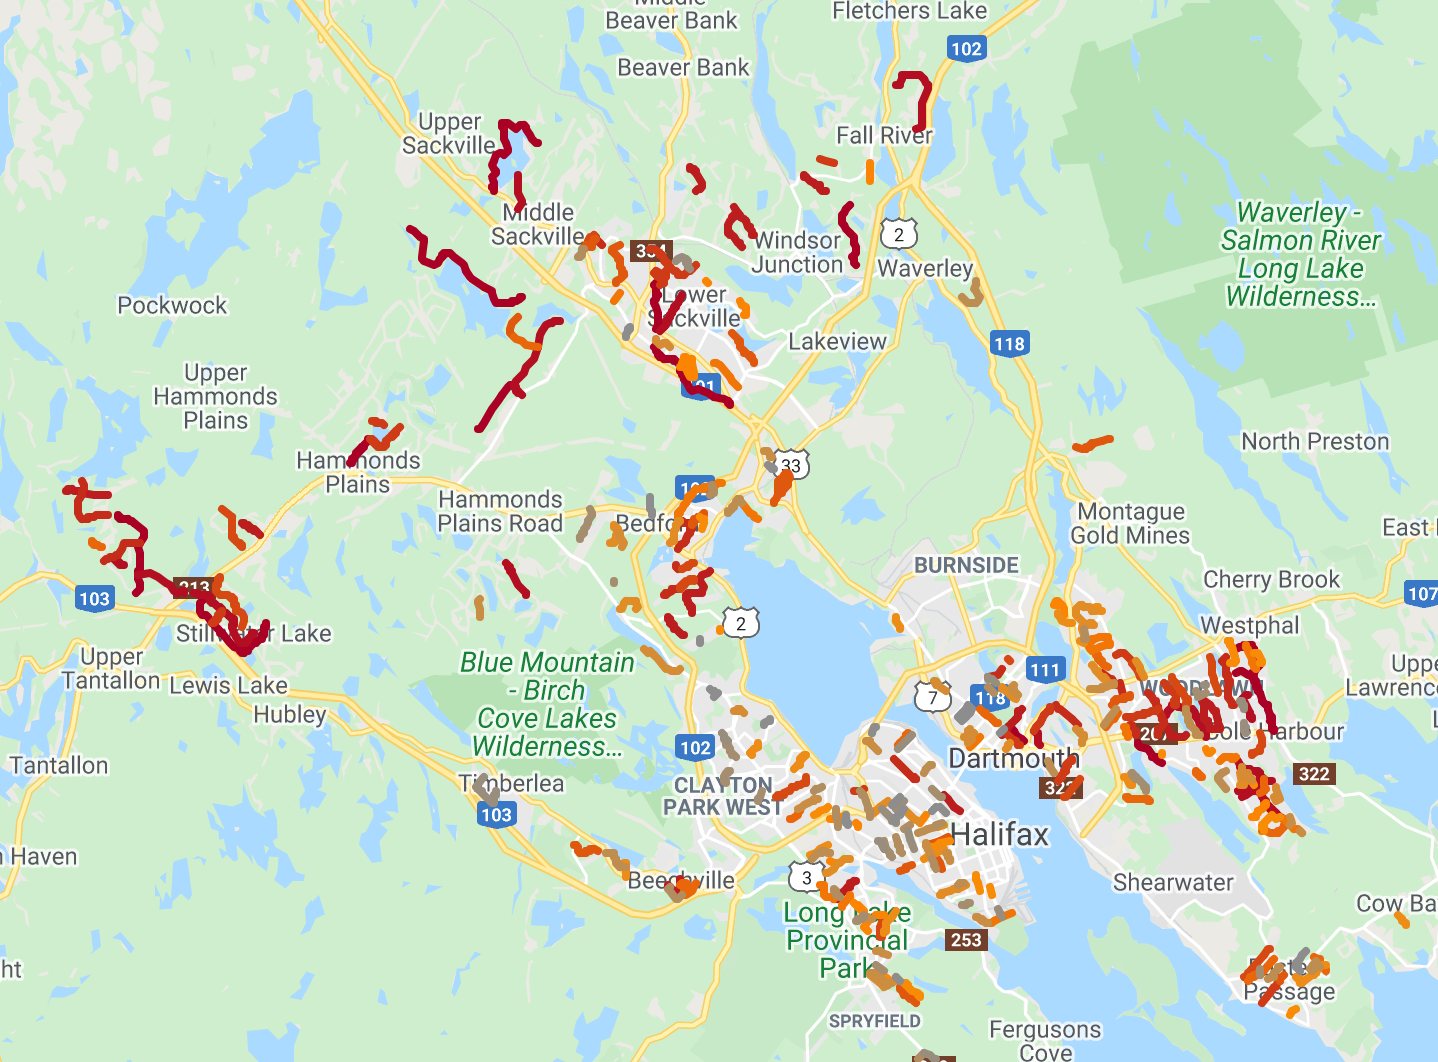 Map image showing completed map with traffic calming requests across Halifax